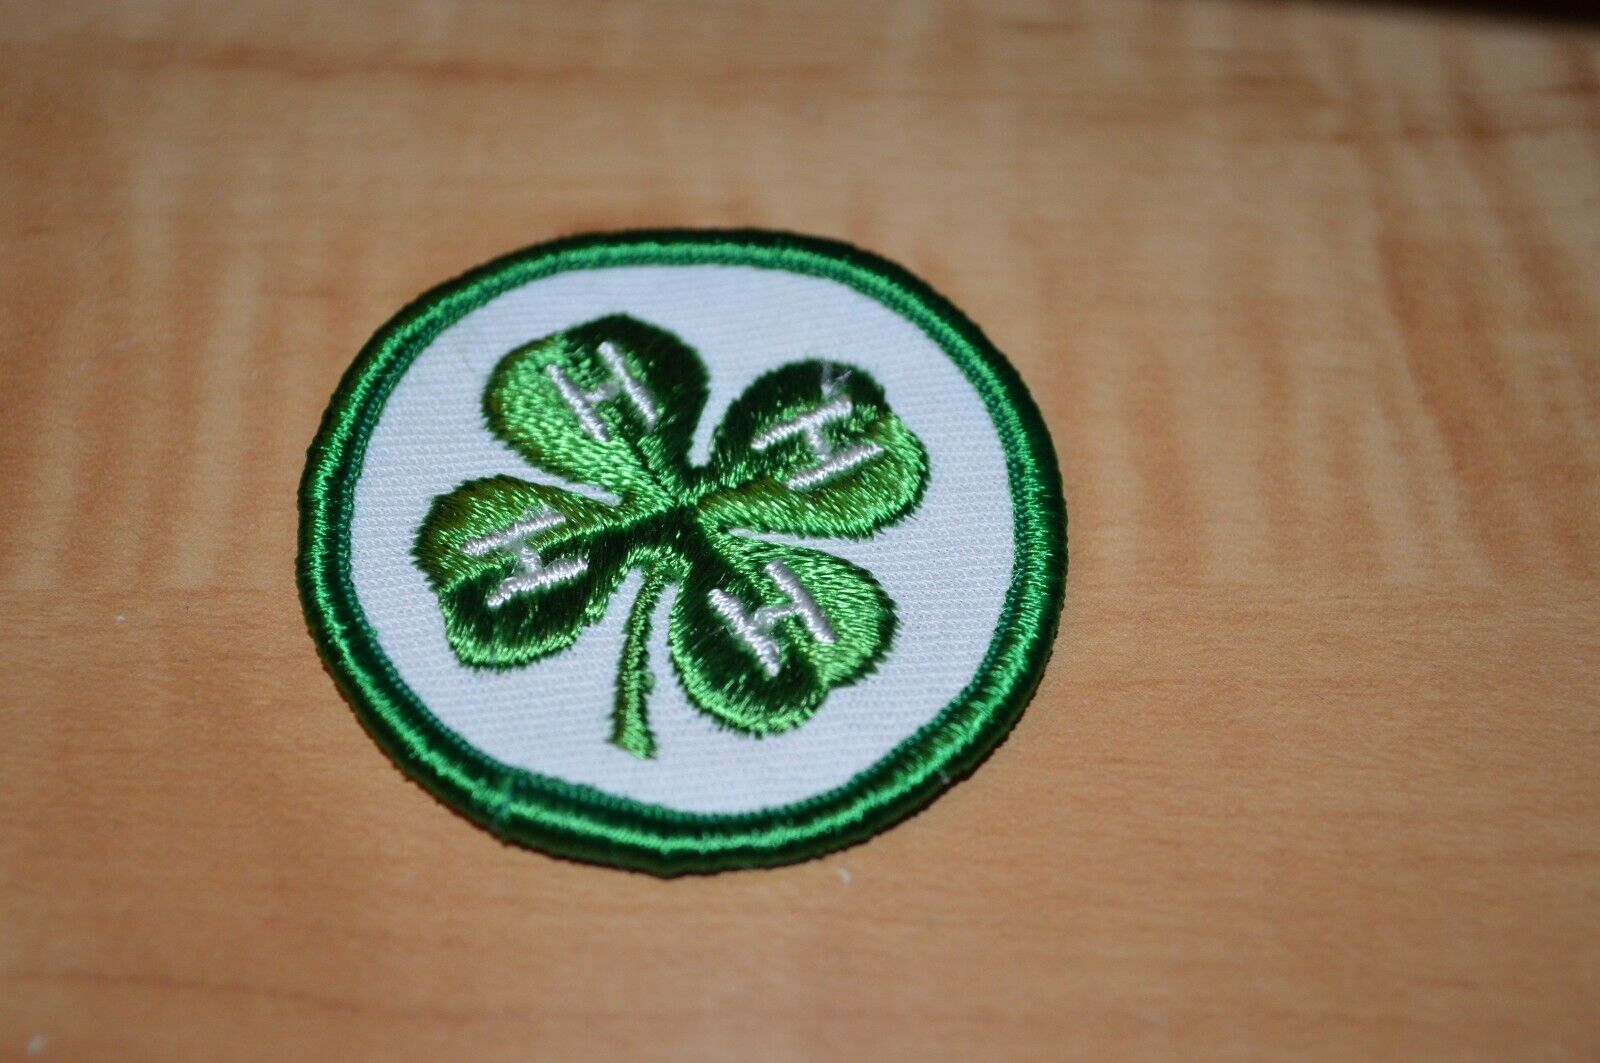 NEW Old Stock 4H Club Green Member Clothing/Shirt Four Leaf Clover Patch